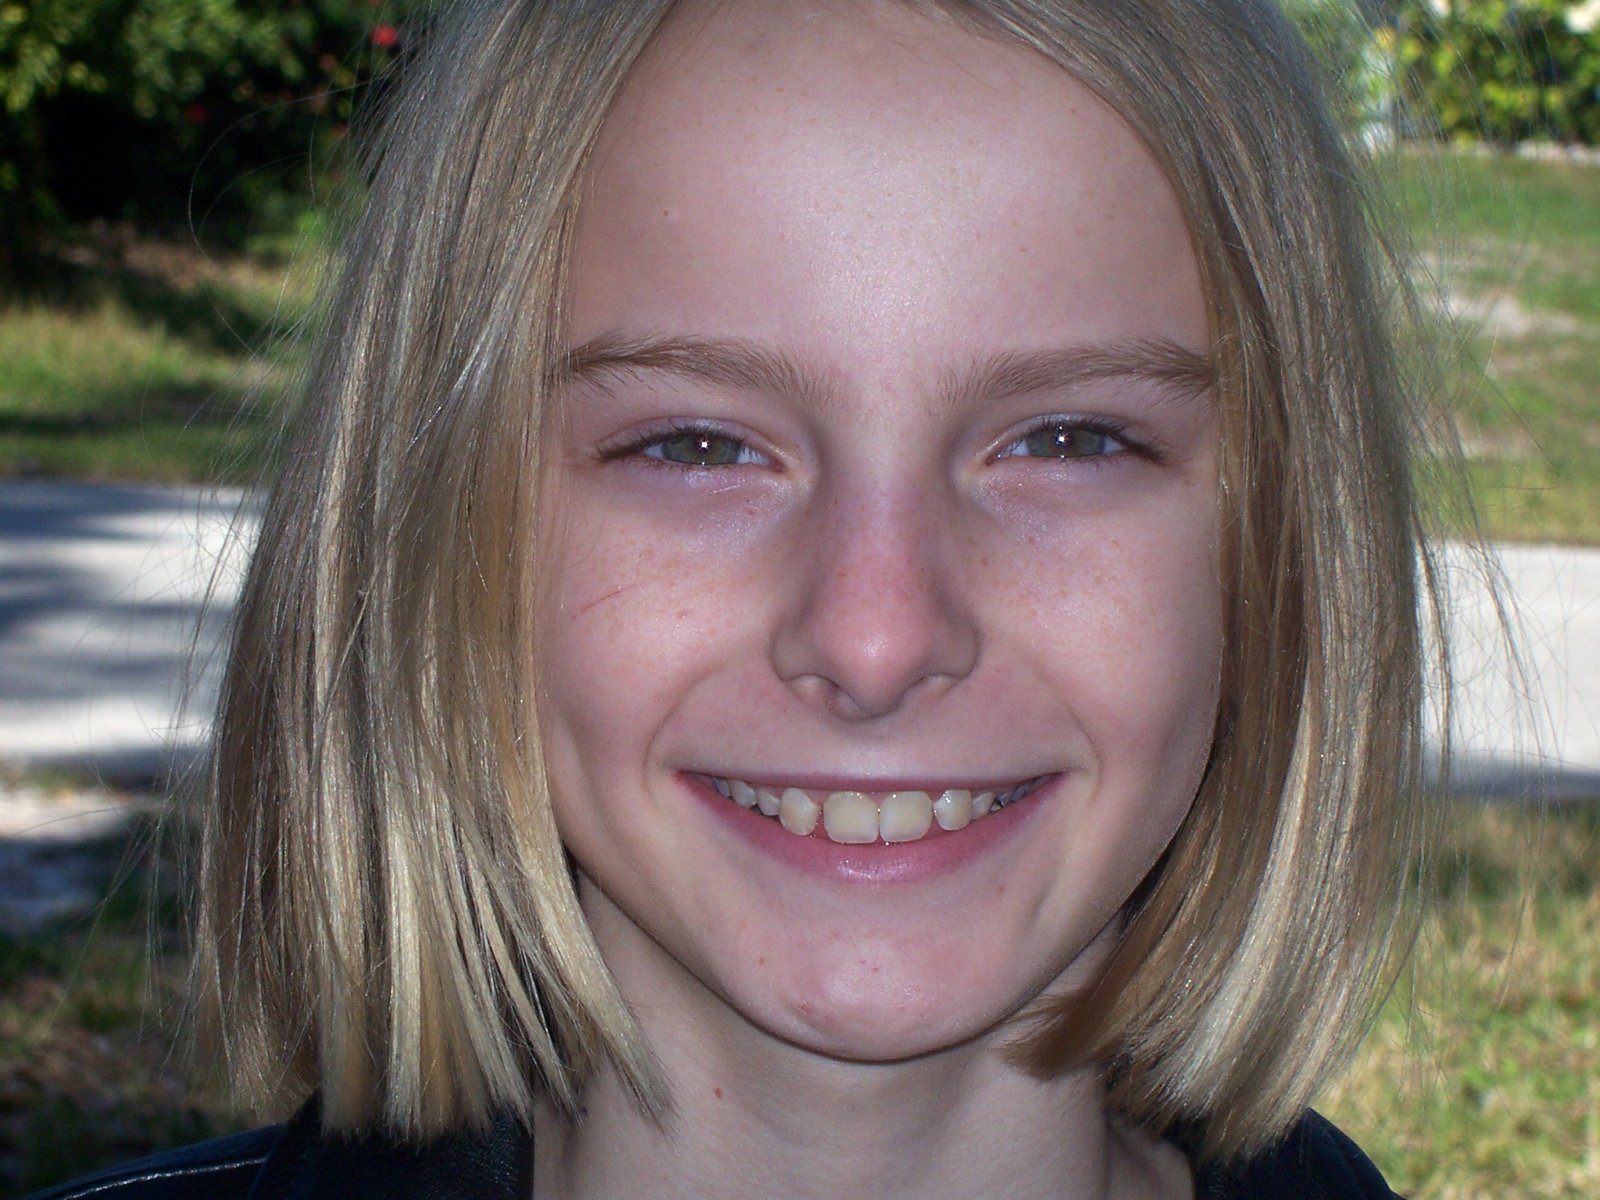 a young blond child with light blond hair smiling